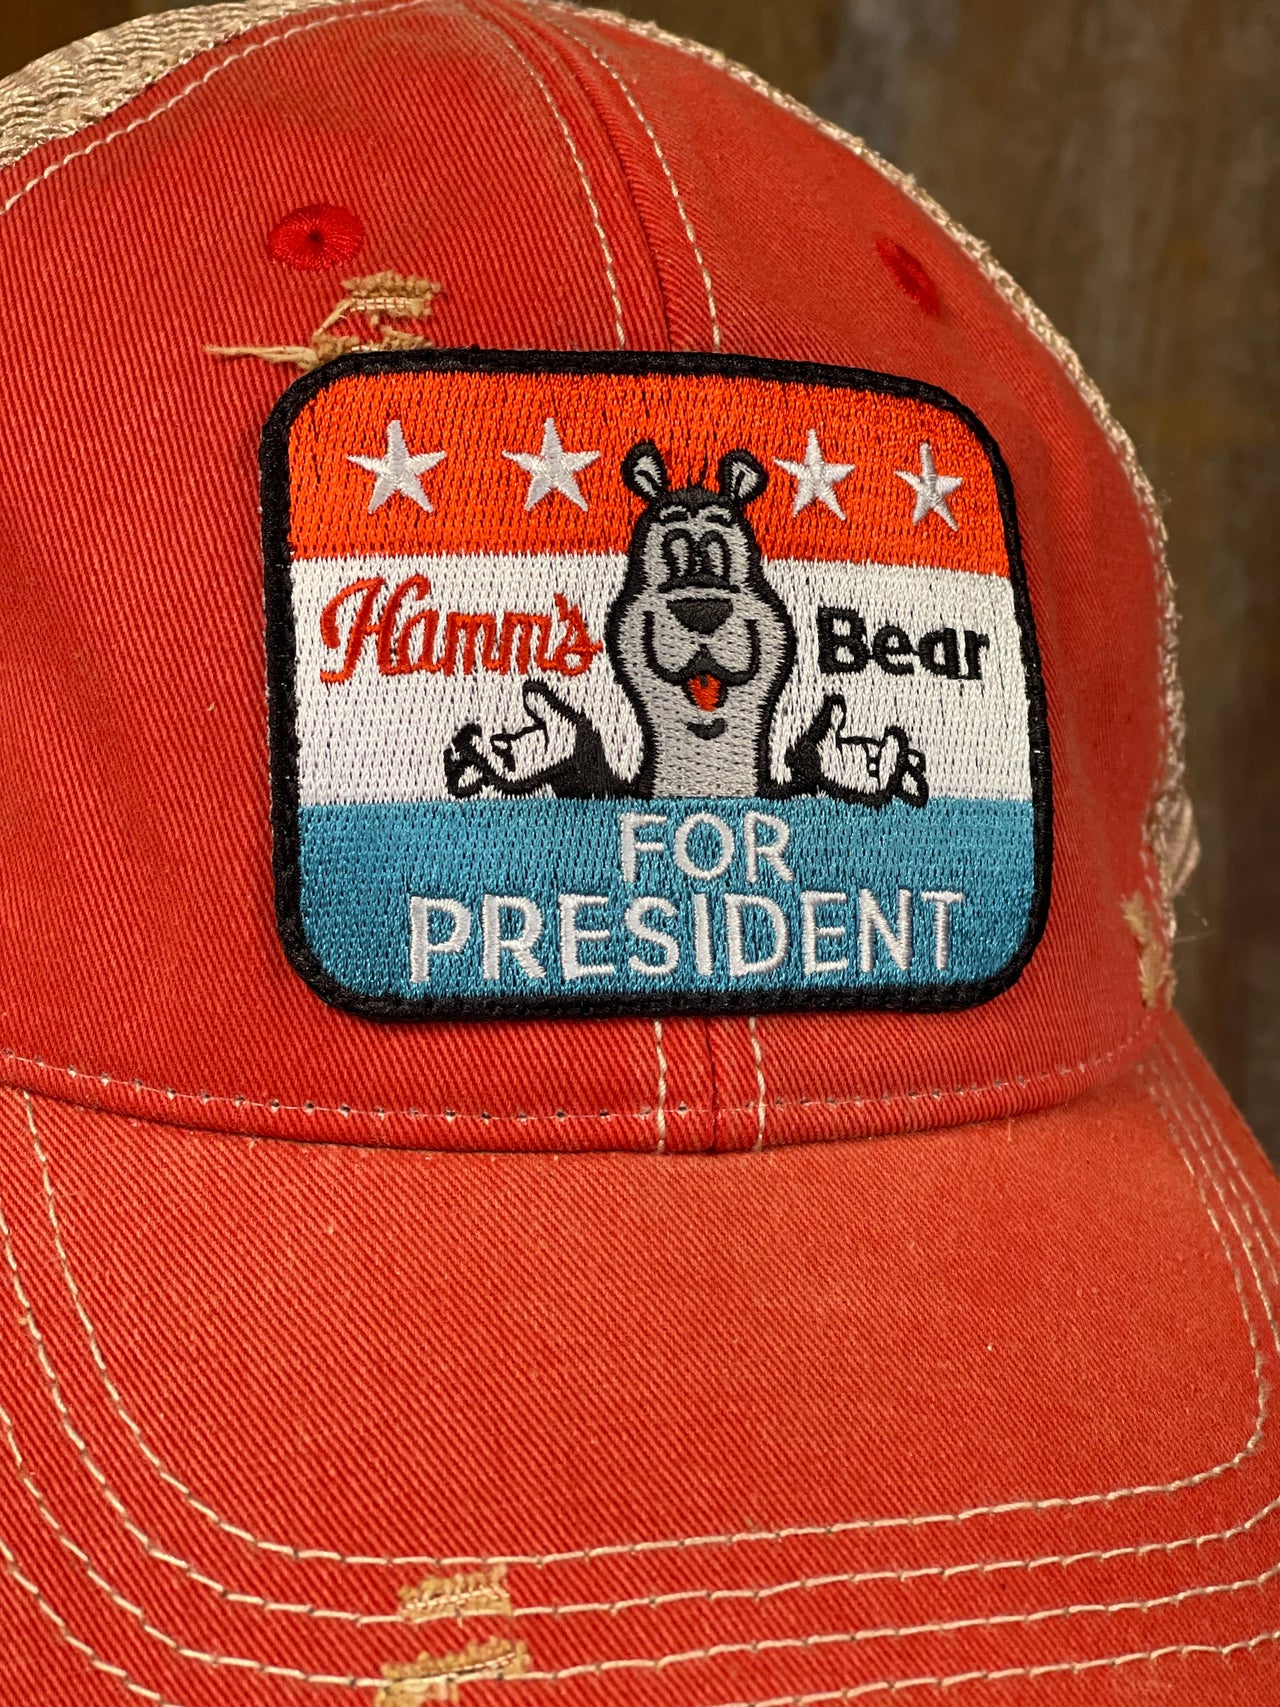 Hamm's Bear For President Hat- Distressed Red Snapback